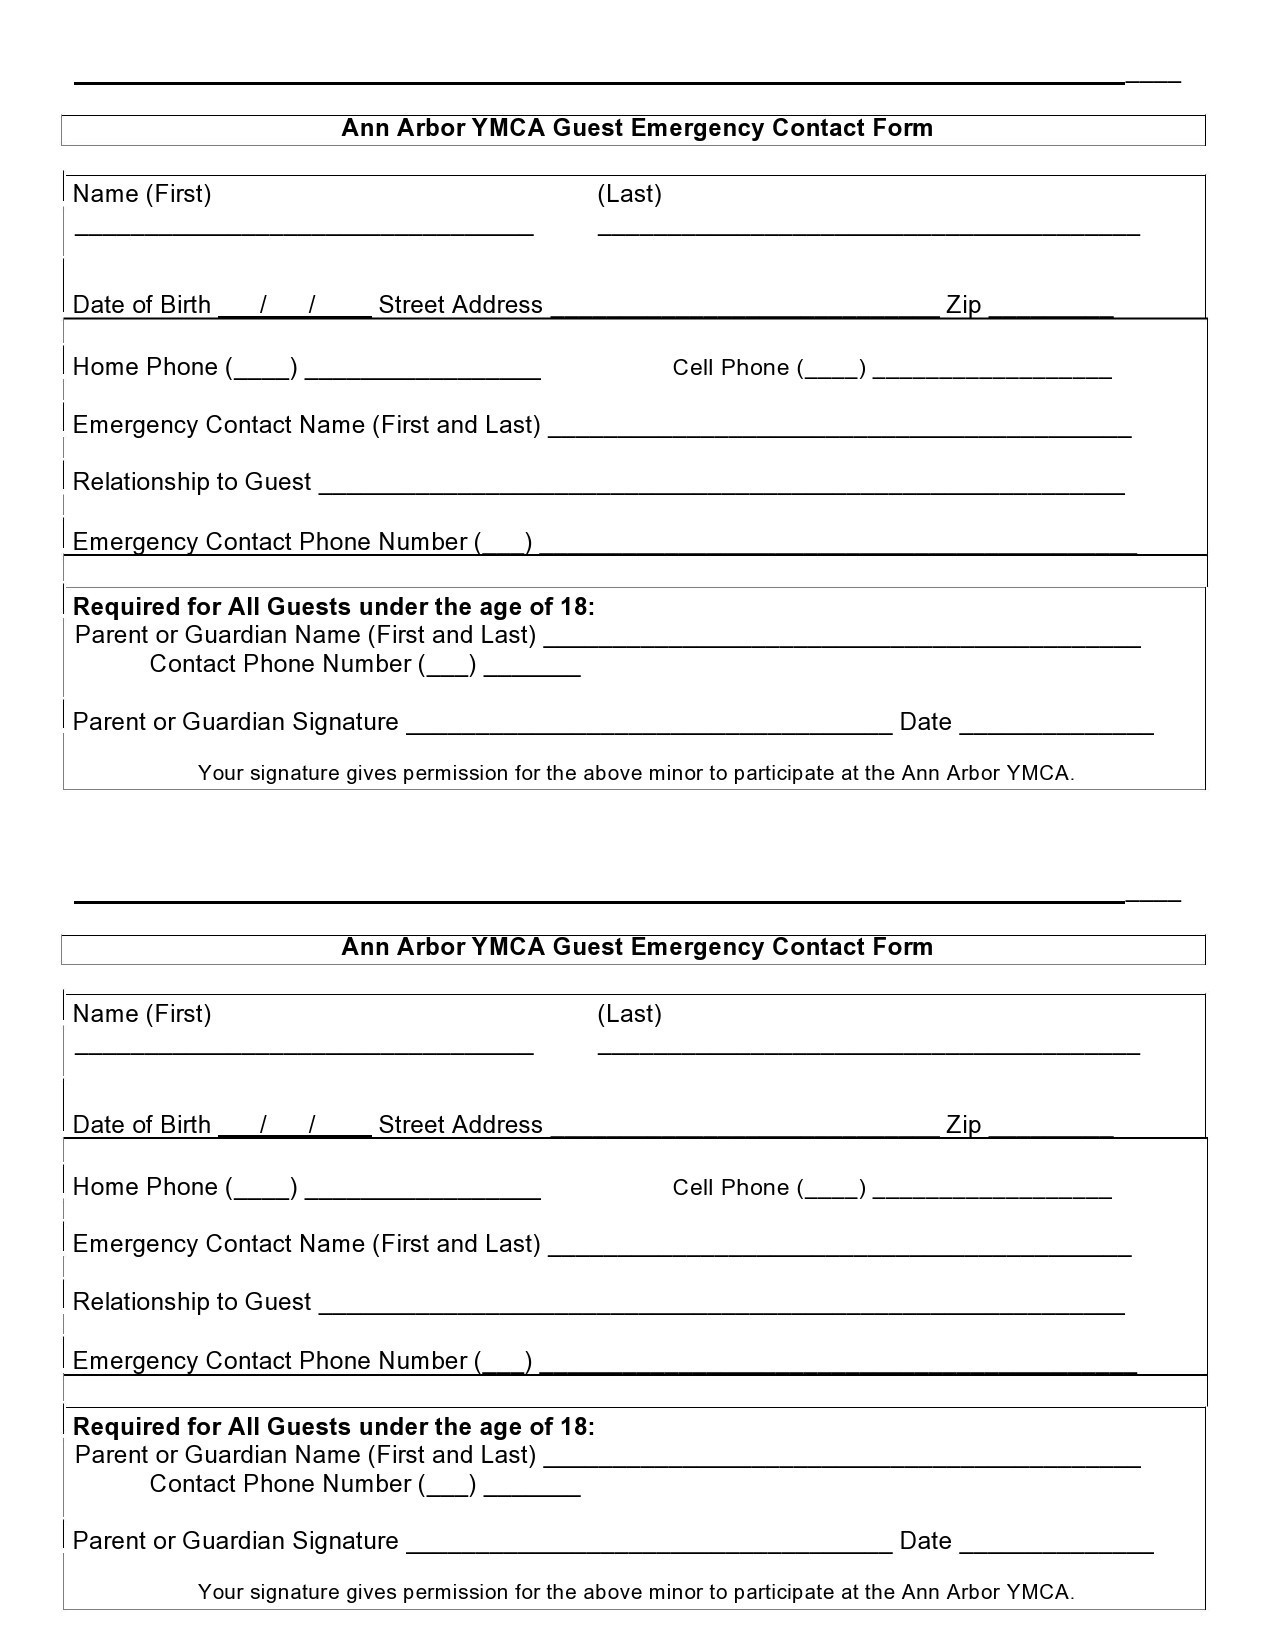 Free emergency contact form 17